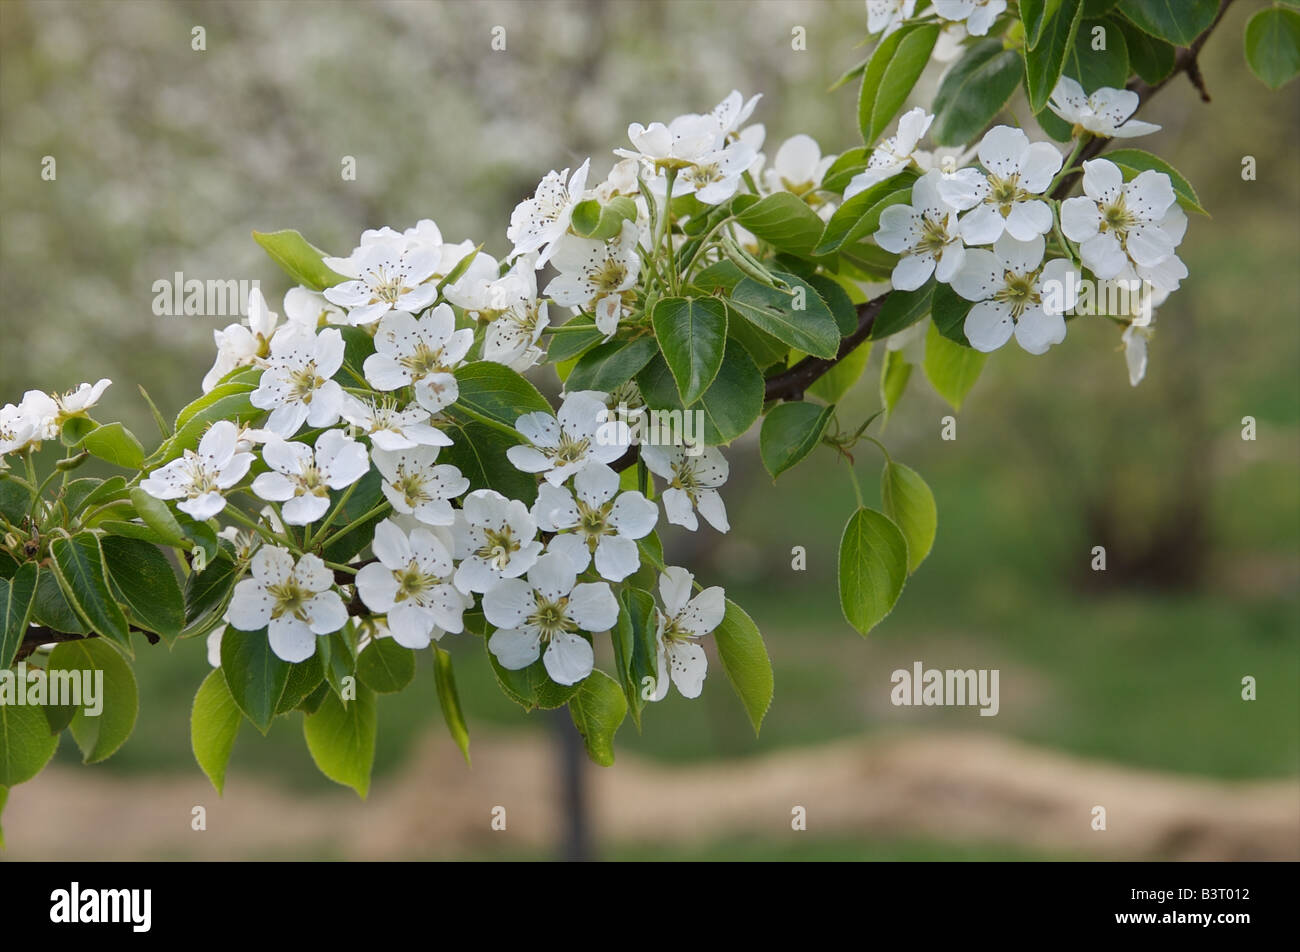 A Ure pear (Pyrus ussuriensis ure) tree branch full of blossoms Stock Photo